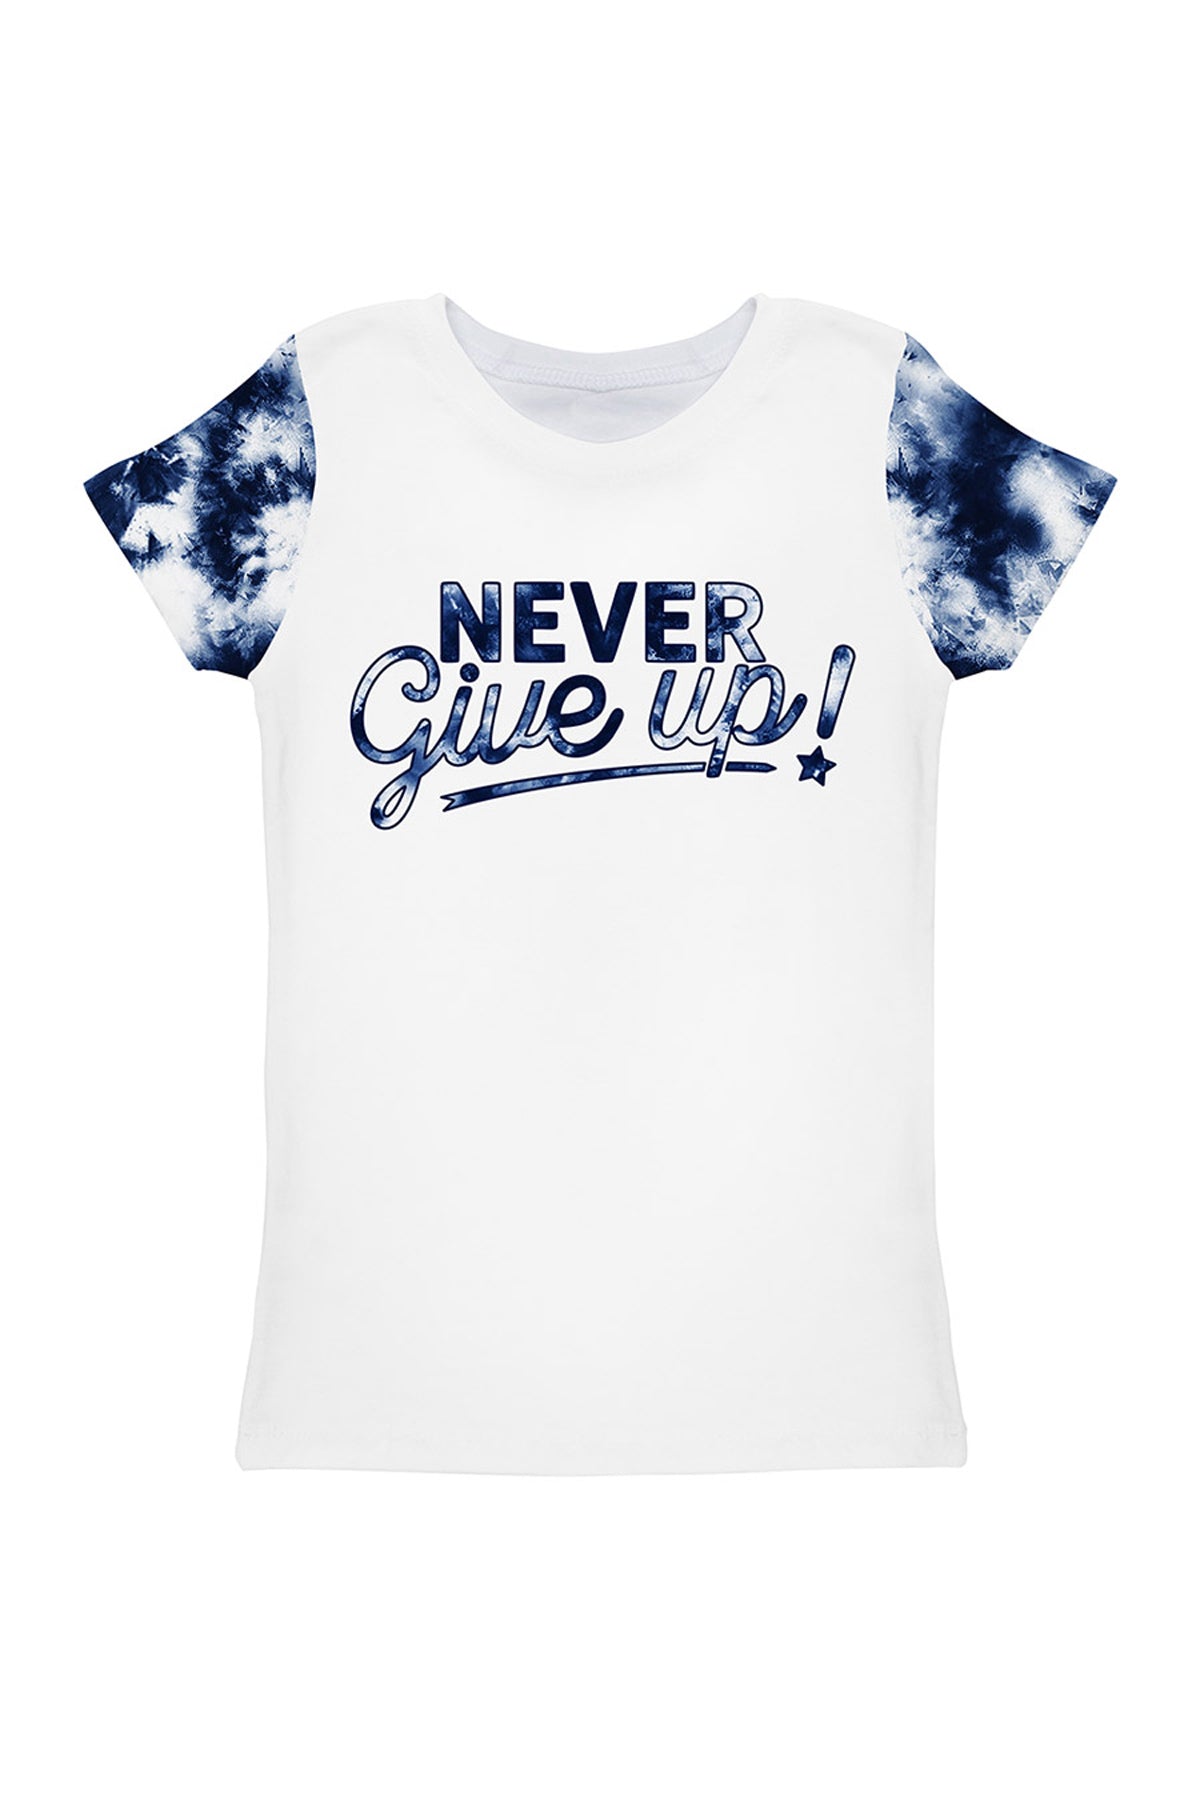 3 for $49! Waterfall Zoe White & Blue Never Give Up Quote Cute T-Shirt - Kids - Pineapple Clothing